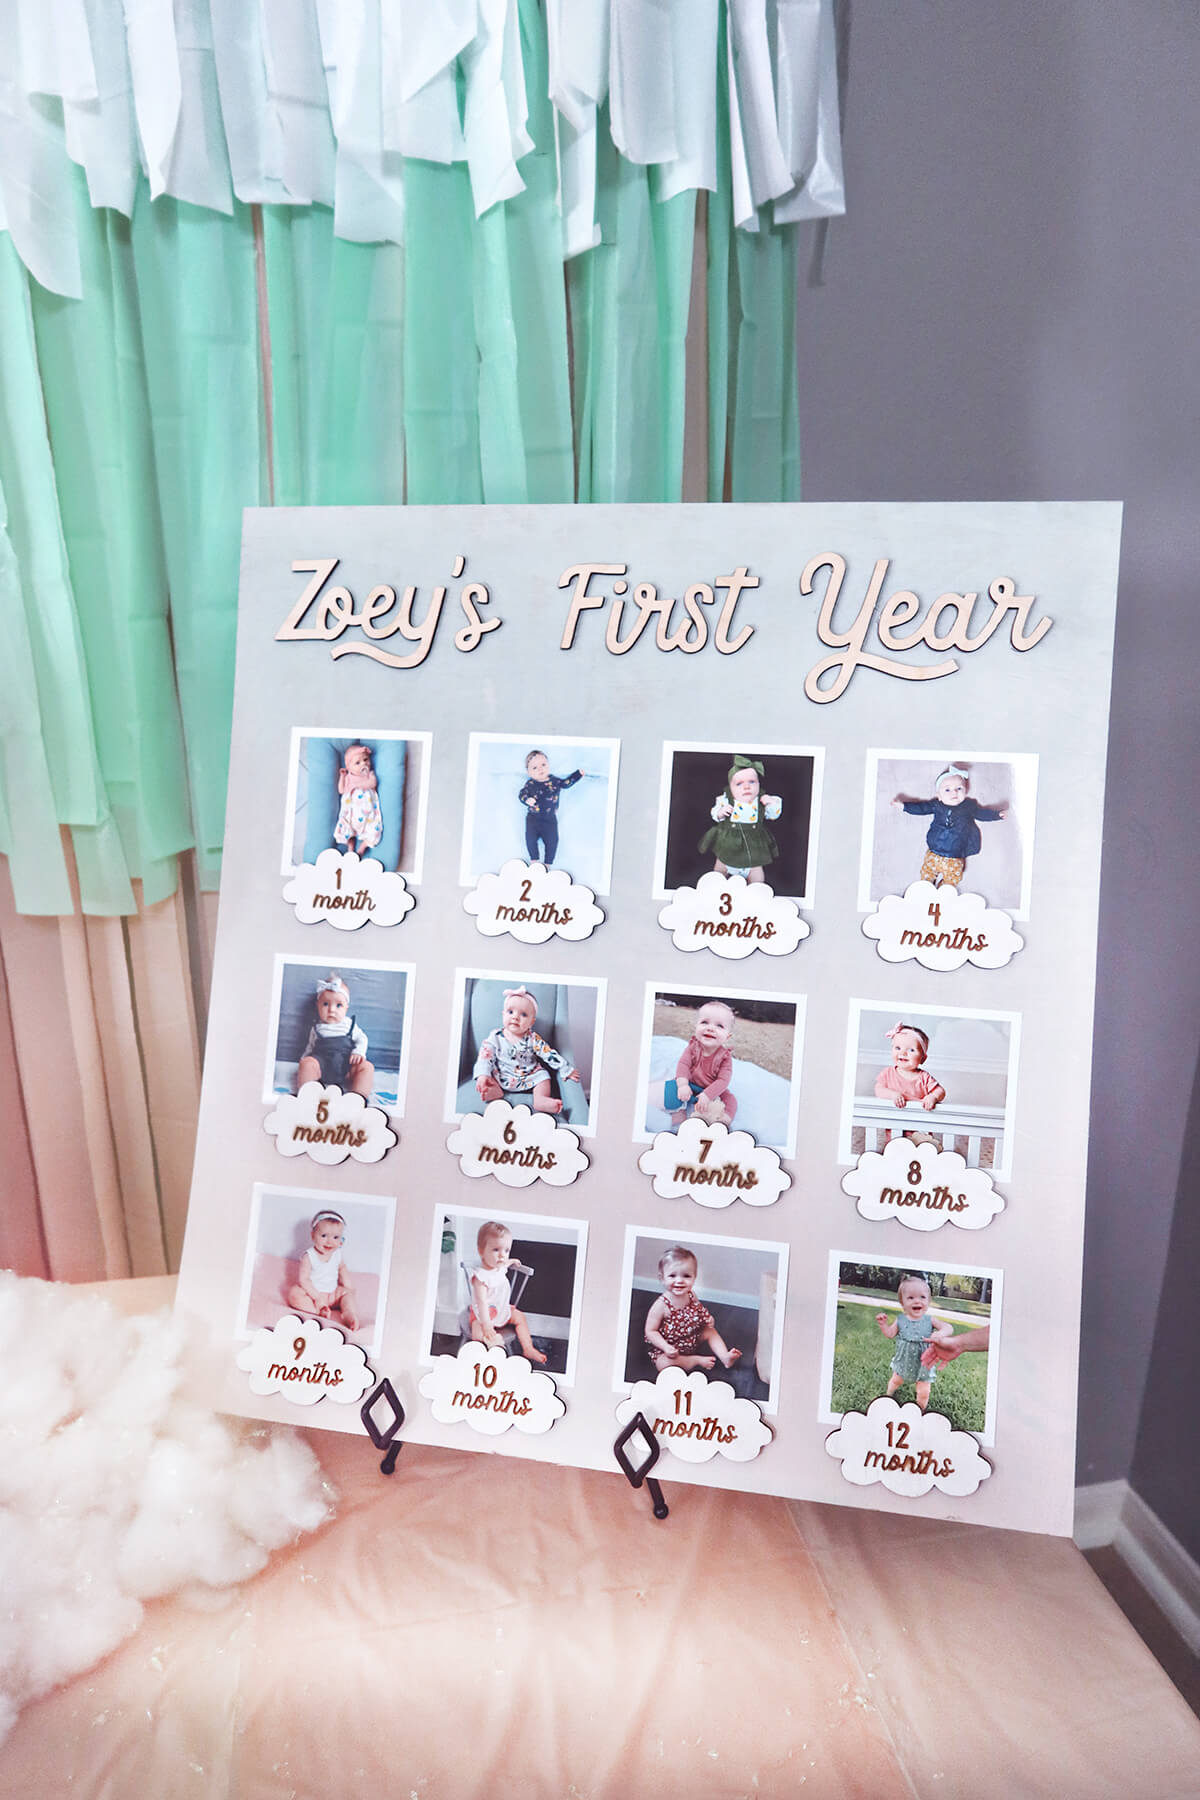 Cloud 1st Birthday Party ideas and inspiration